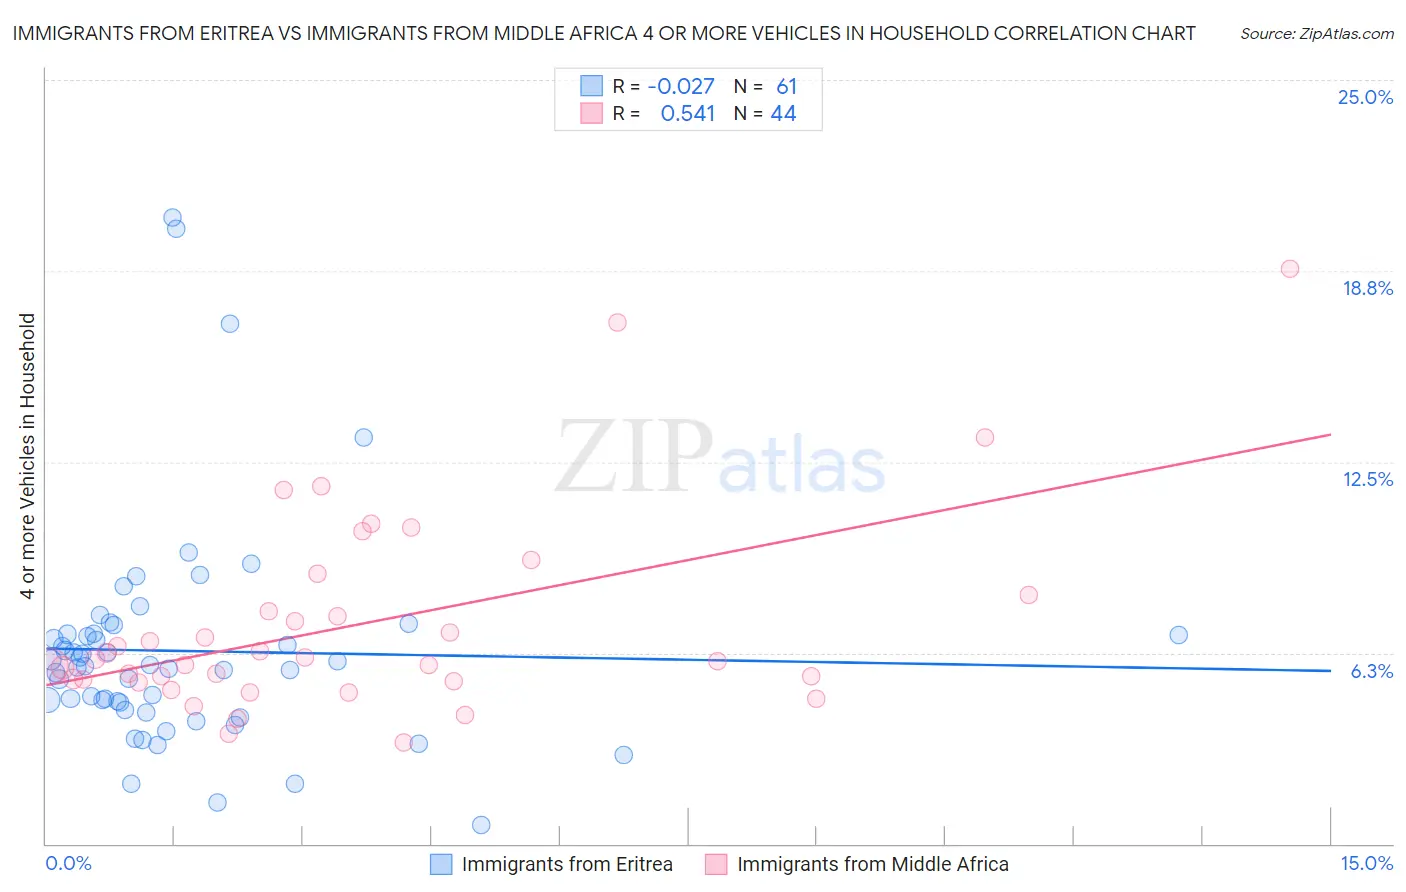 Immigrants from Eritrea vs Immigrants from Middle Africa 4 or more Vehicles in Household